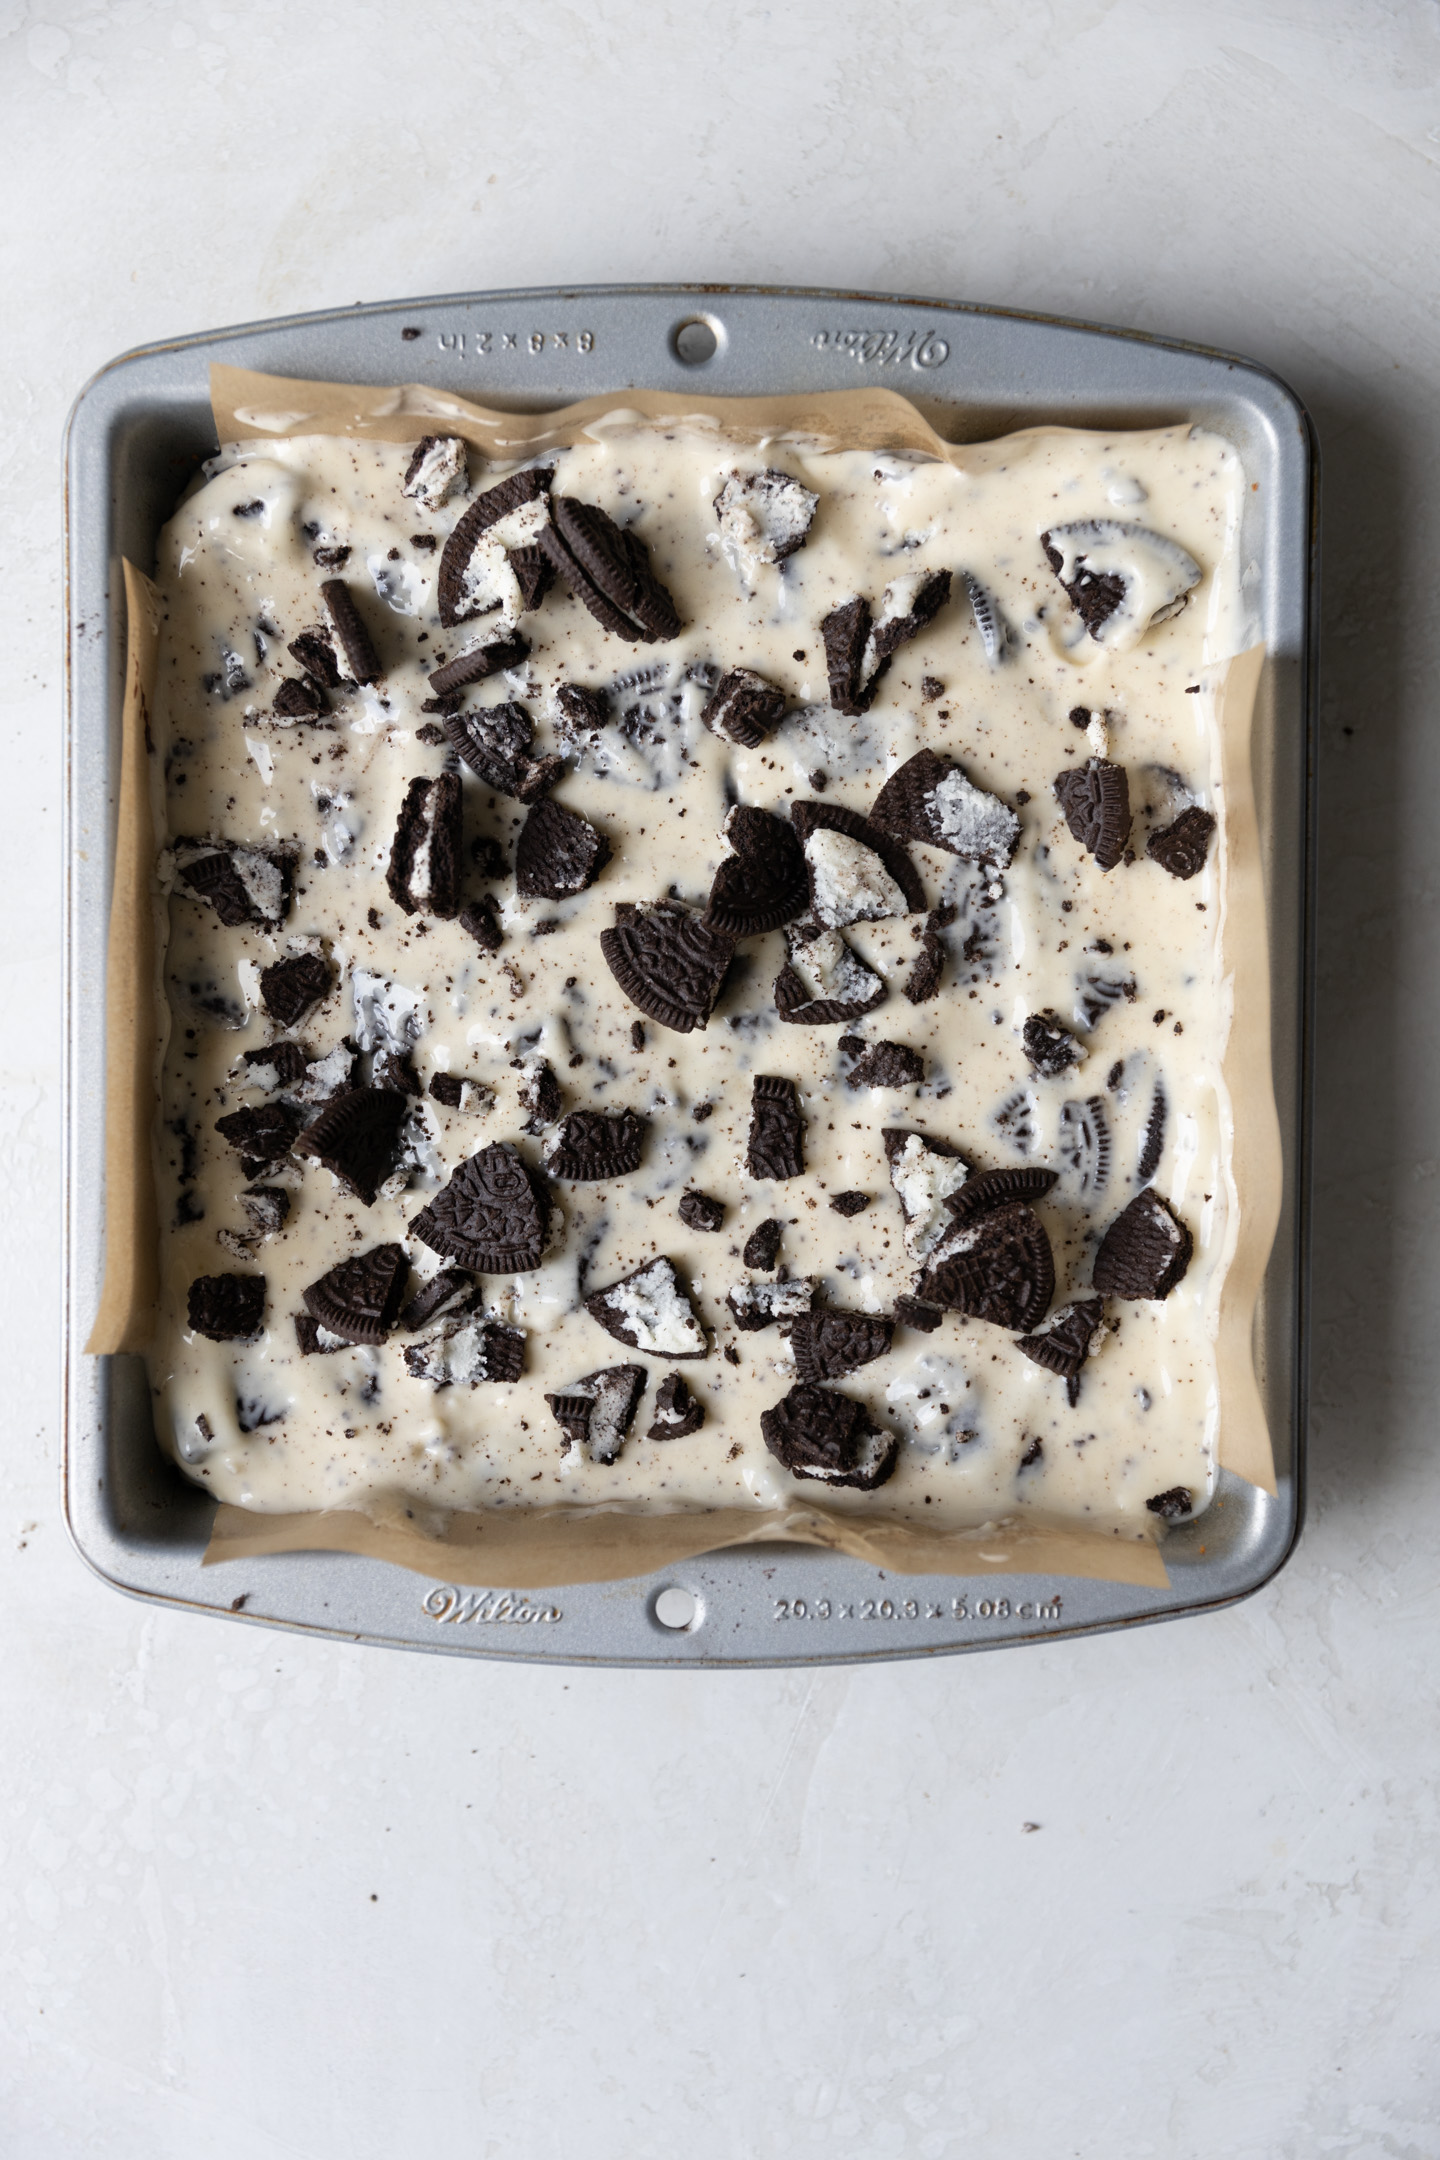 Oreo cheesecake batter topped with crushed Oreos in a brownie pan.